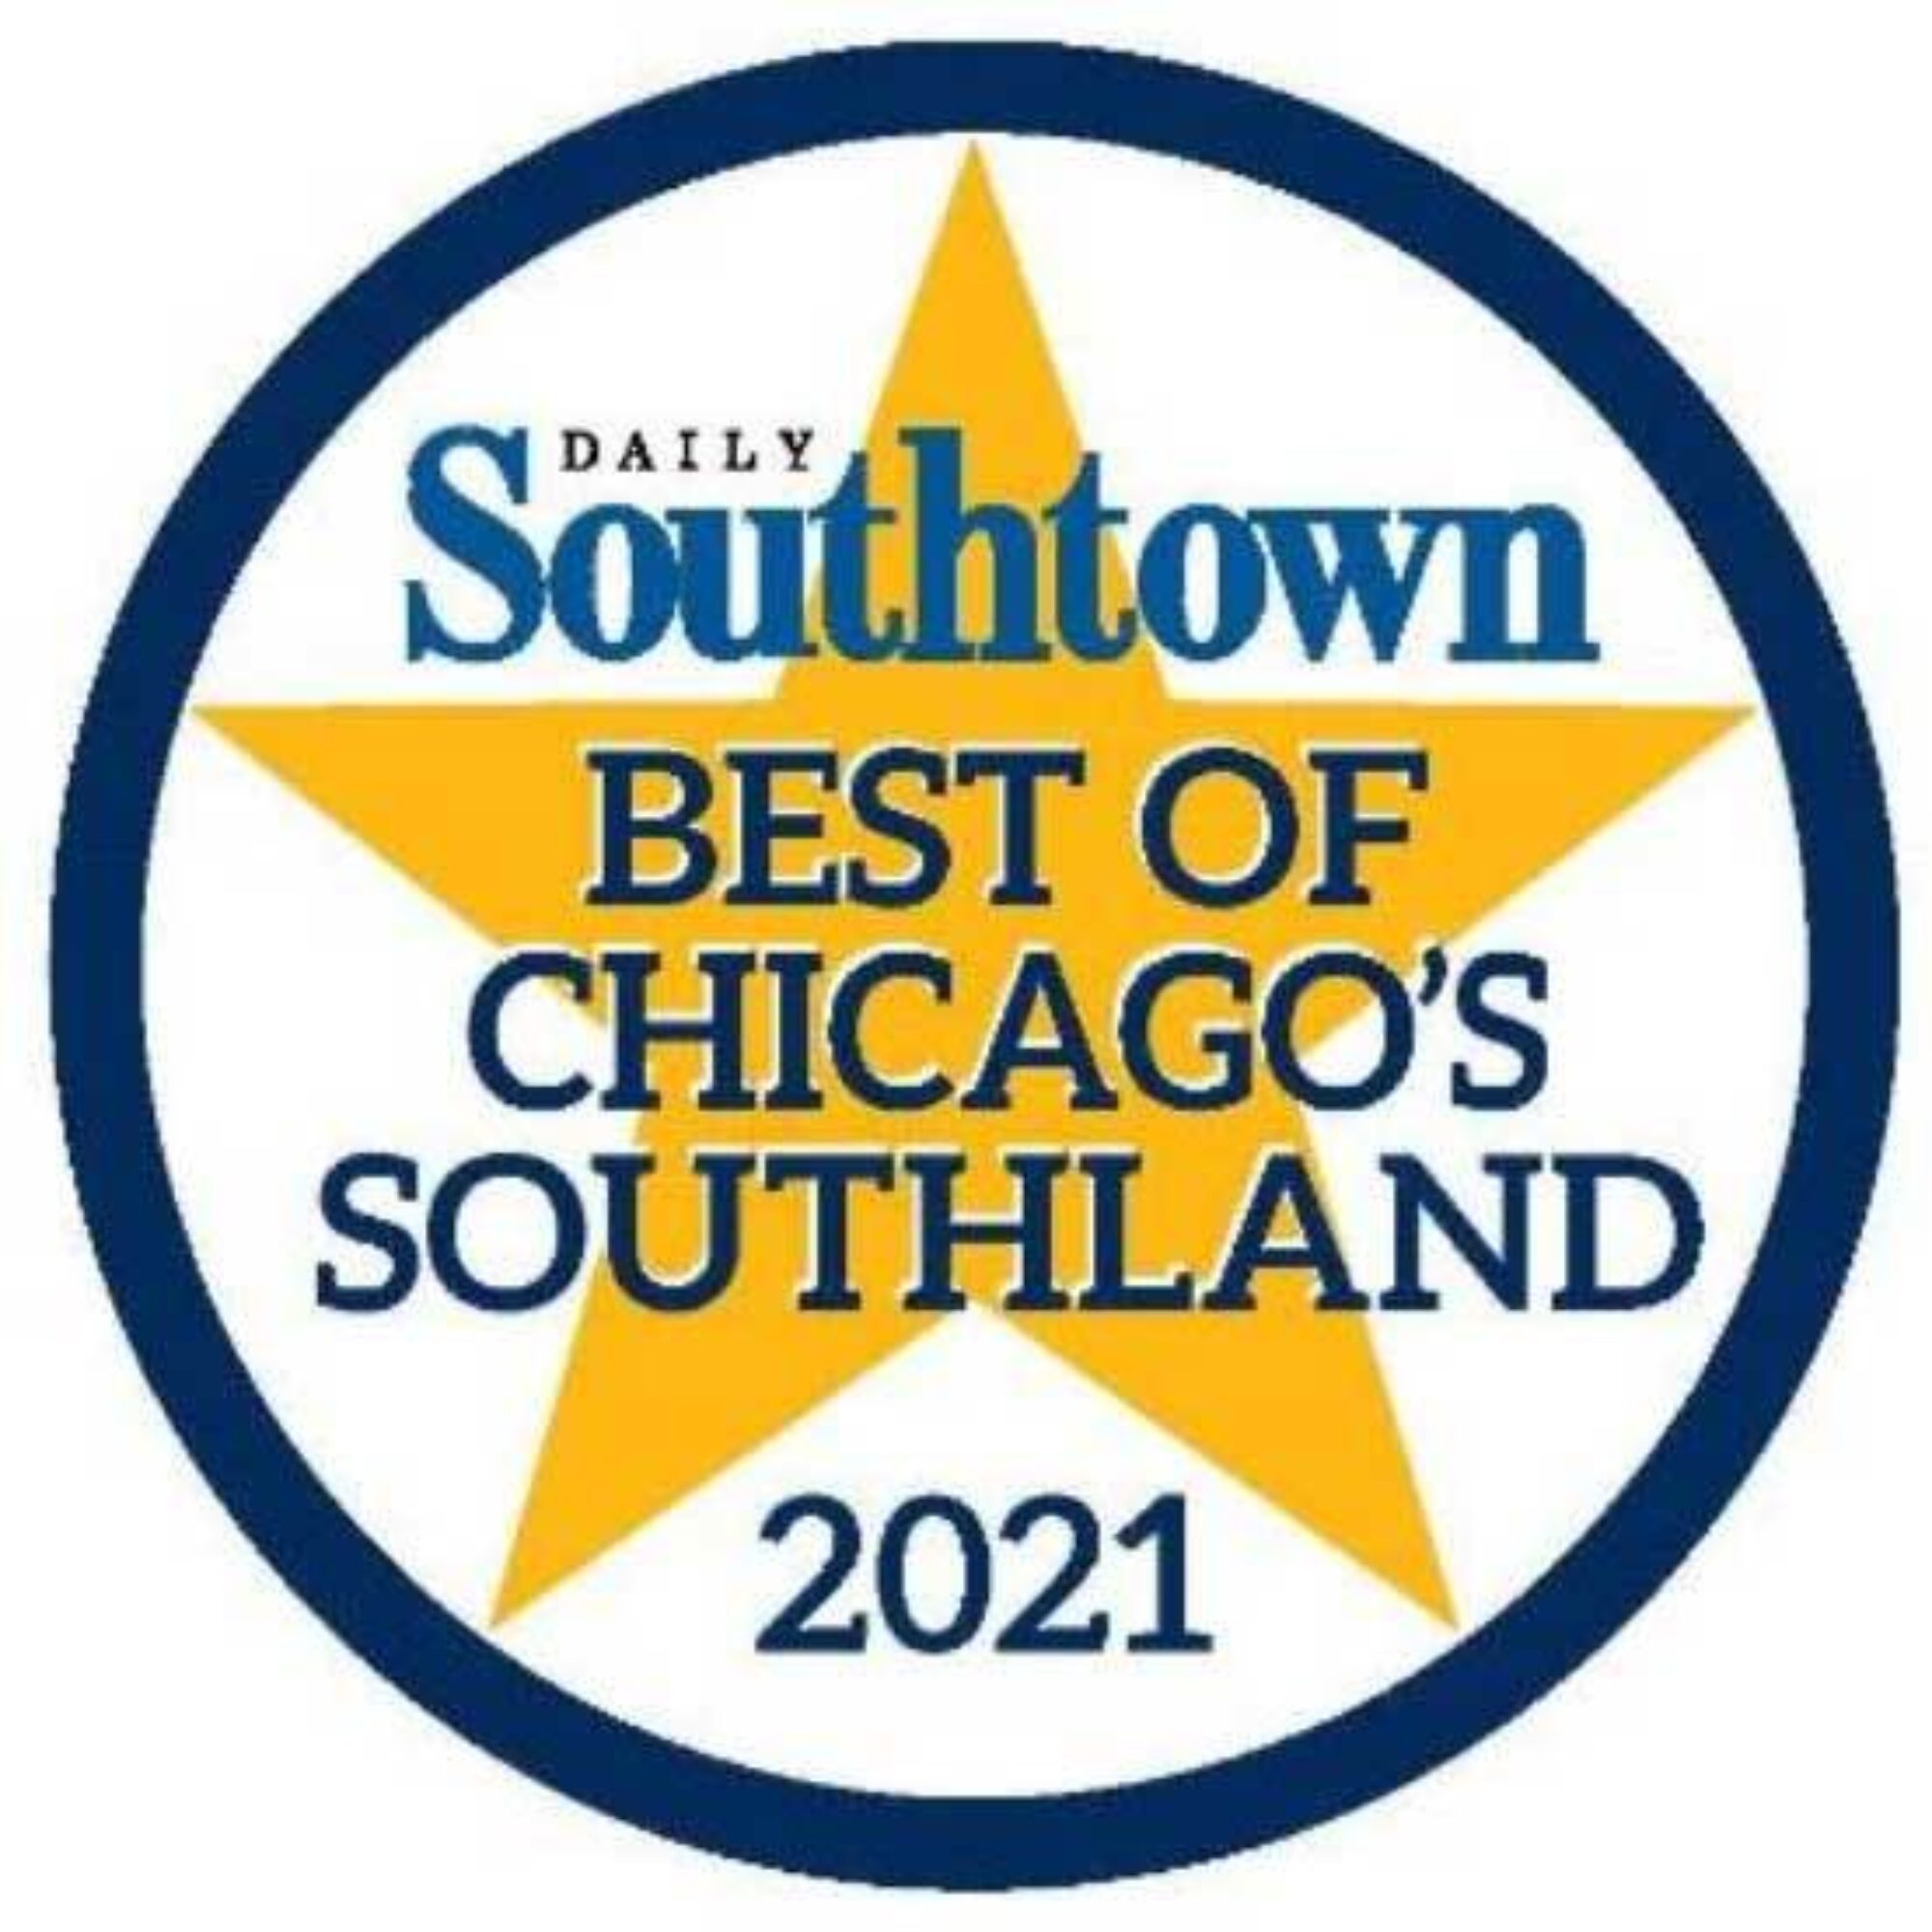 Best of chicagos southland 2021